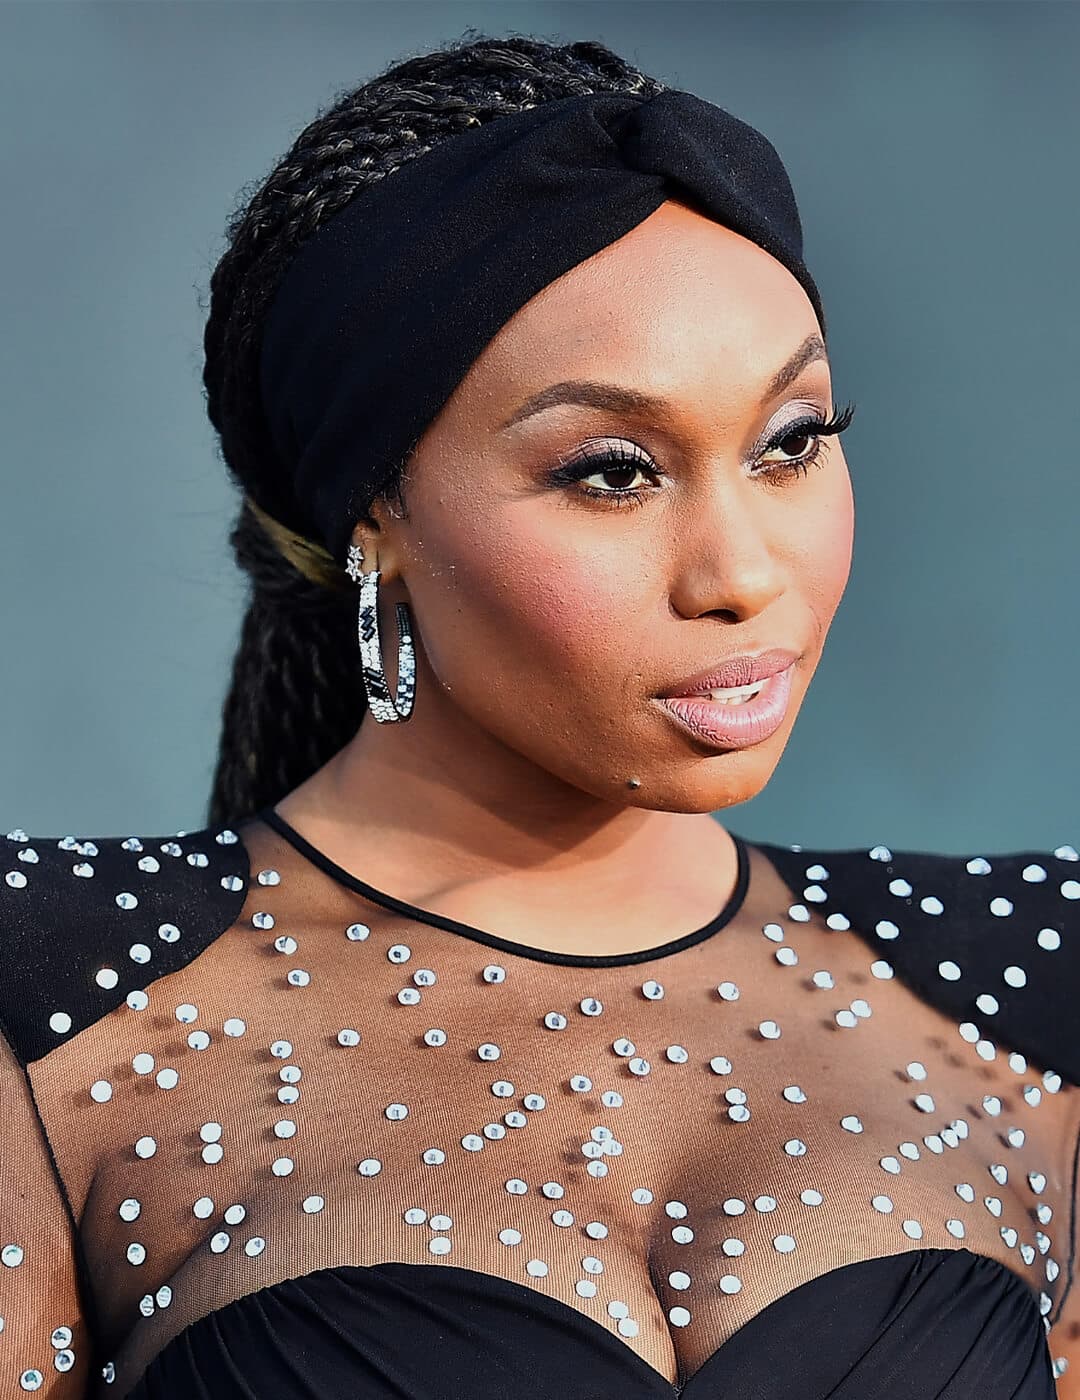 Angell Conwell looking glamorous in a black dress with silver sequin accents and rocking a braided hairstyle with headband